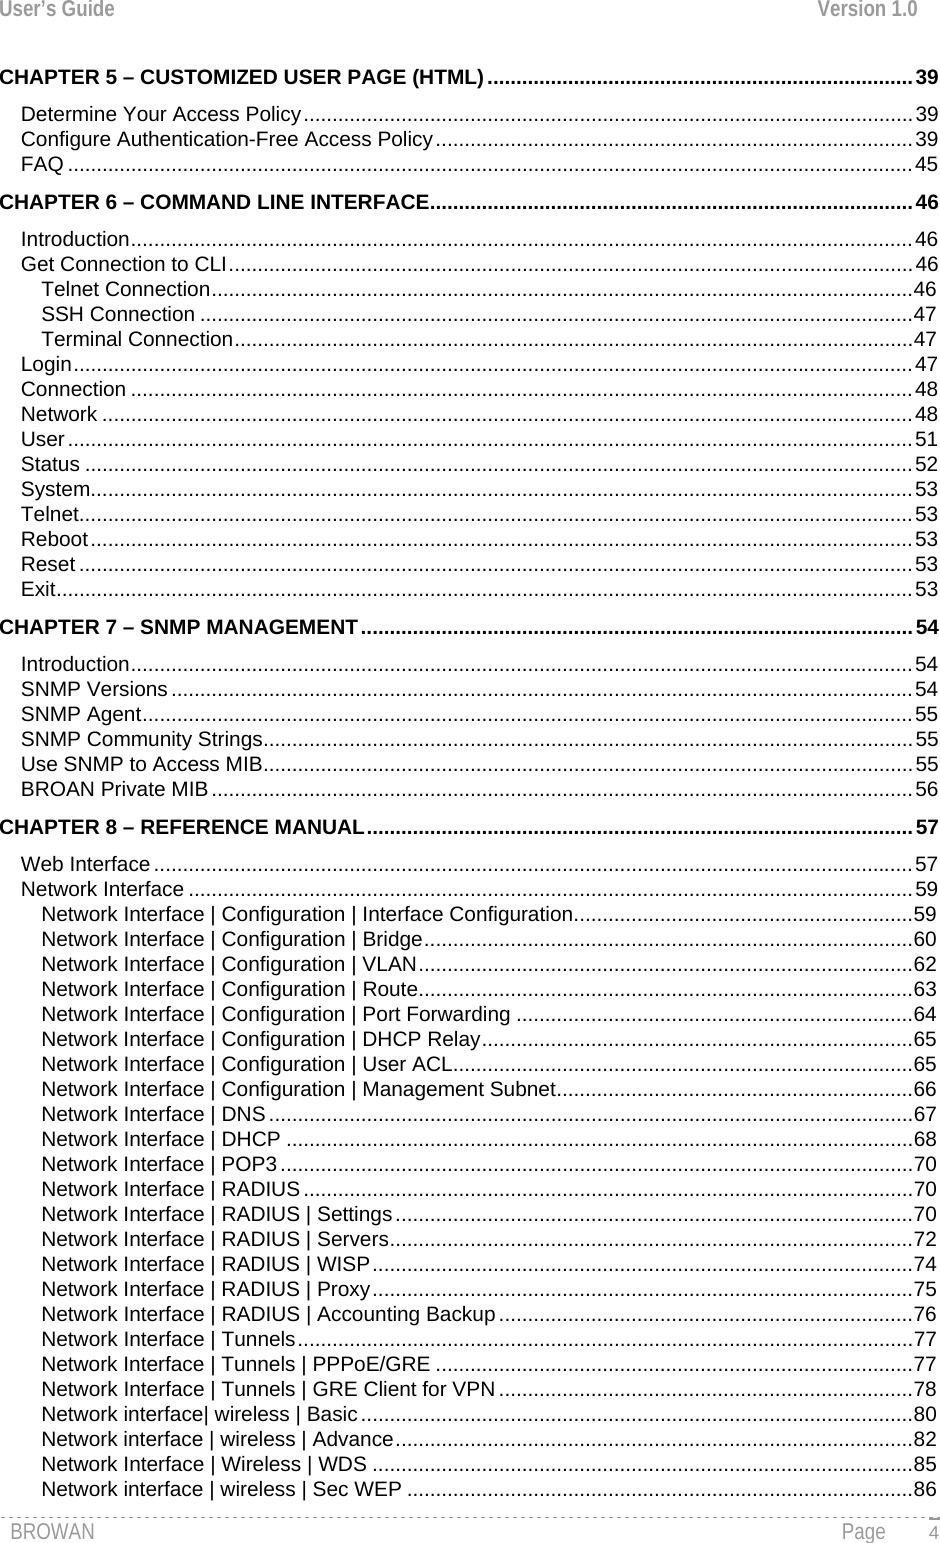 User’s Guide  Version 1.0  CHAPTER 5 – CUSTOMIZED USER PAGE (HTML)..........................................................................39 Determine Your Access Policy..........................................................................................................39 Configure Authentication-Free Access Policy...................................................................................39 FAQ ...................................................................................................................................................45 CHAPTER 6 – COMMAND LINE INTERFACE....................................................................................46 Introduction........................................................................................................................................46 Get Connection to CLI.......................................................................................................................46 Telnet Connection..........................................................................................................................46 SSH Connection ............................................................................................................................47 Terminal Connection......................................................................................................................47 Login..................................................................................................................................................47 Connection ........................................................................................................................................48 Network .............................................................................................................................................48 User...................................................................................................................................................51 Status ................................................................................................................................................52 System...............................................................................................................................................53 Telnet.................................................................................................................................................53 Reboot...............................................................................................................................................53 Reset .................................................................................................................................................53 Exit.....................................................................................................................................................53 CHAPTER 7 – SNMP MANAGEMENT................................................................................................54 Introduction........................................................................................................................................54 SNMP Versions .................................................................................................................................54 SNMP Agent......................................................................................................................................55 SNMP Community Strings.................................................................................................................55 Use SNMP to Access MIB.................................................................................................................55 BROAN Private MIB..........................................................................................................................56 CHAPTER 8 – REFERENCE MANUAL...............................................................................................57 Web Interface....................................................................................................................................57 Network Interface ..............................................................................................................................59 Network Interface | Configuration | Interface Configuration...........................................................59 Network Interface | Configuration | Bridge.....................................................................................60 Network Interface | Configuration | VLAN......................................................................................62 Network Interface | Configuration | Route......................................................................................63 Network Interface | Configuration | Port Forwarding .....................................................................64 Network Interface | Configuration | DHCP Relay...........................................................................65 Network Interface | Configuration | User ACL................................................................................65 Network Interface | Configuration | Management Subnet..............................................................66 Network Interface | DNS ................................................................................................................67 Network Interface | DHCP .............................................................................................................68 Network Interface | POP3 ..............................................................................................................70 Network Interface | RADIUS..........................................................................................................70 Network Interface | RADIUS | Settings..........................................................................................70 Network Interface | RADIUS | Servers...........................................................................................72 Network Interface | RADIUS | WISP..............................................................................................74 Network Interface | RADIUS | Proxy..............................................................................................75 Network Interface | RADIUS | Accounting Backup........................................................................76 Network Interface | Tunnels...........................................................................................................77 Network Interface | Tunnels | PPPoE/GRE ...................................................................................77 Network Interface | Tunnels | GRE Client for VPN........................................................................78 Network interface| wireless | Basic................................................................................................80 Network interface | wireless | Advance..........................................................................................82 Network Interface | Wireless | WDS ..............................................................................................85 Network interface | wireless | Sec WEP ........................................................................................86 BROWAN                                                                                                                                               Page   4